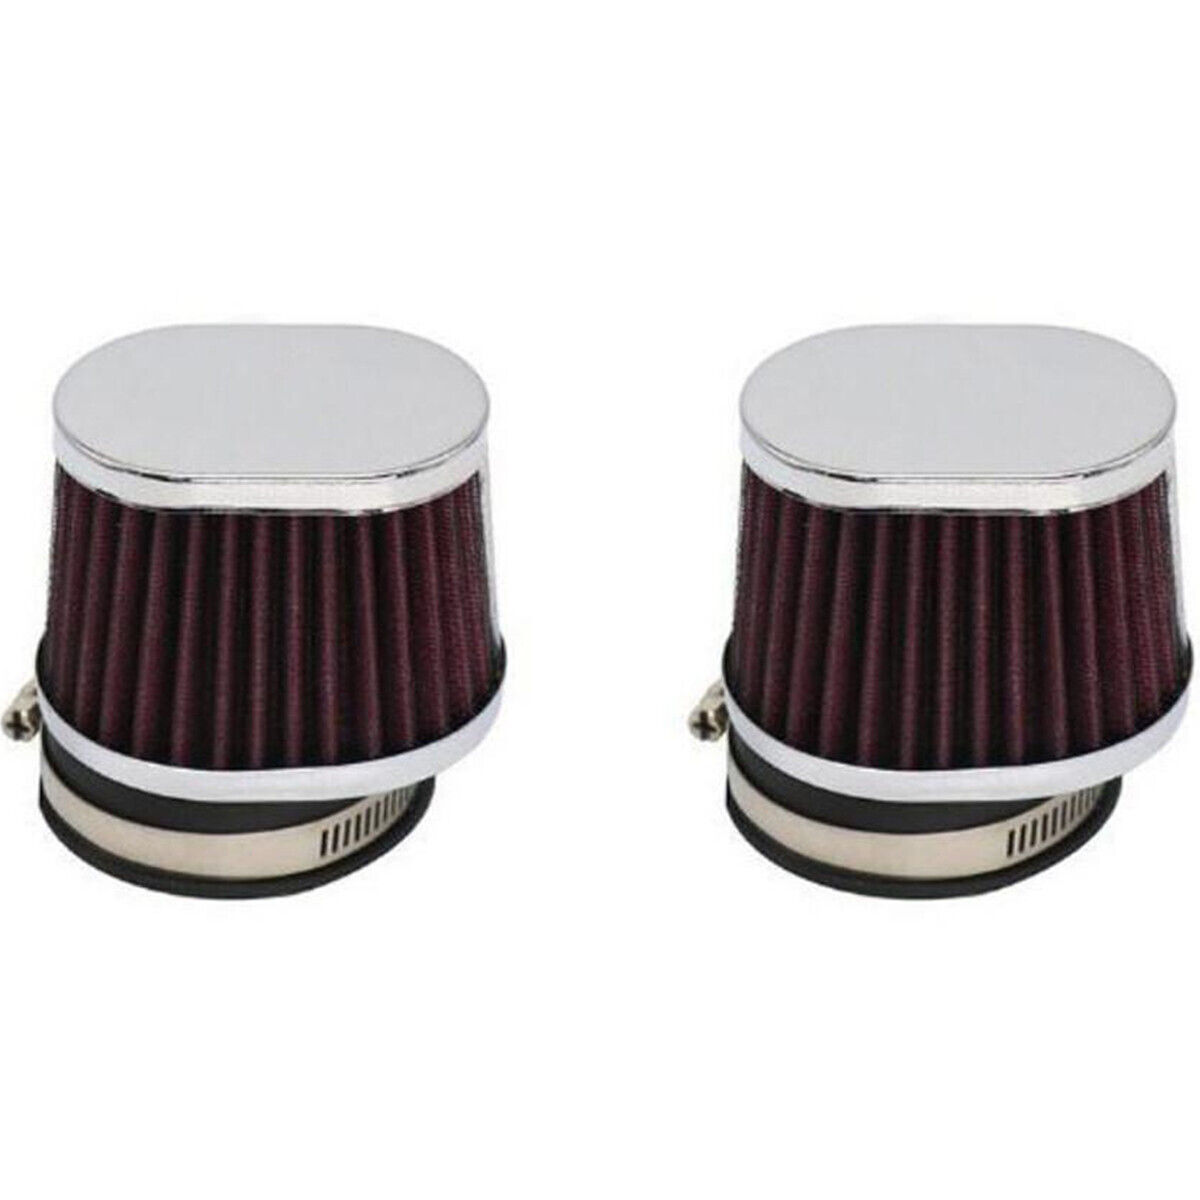 38mm Motorcycle Air Filter Performance High Flow Carburetor Replacement Parts